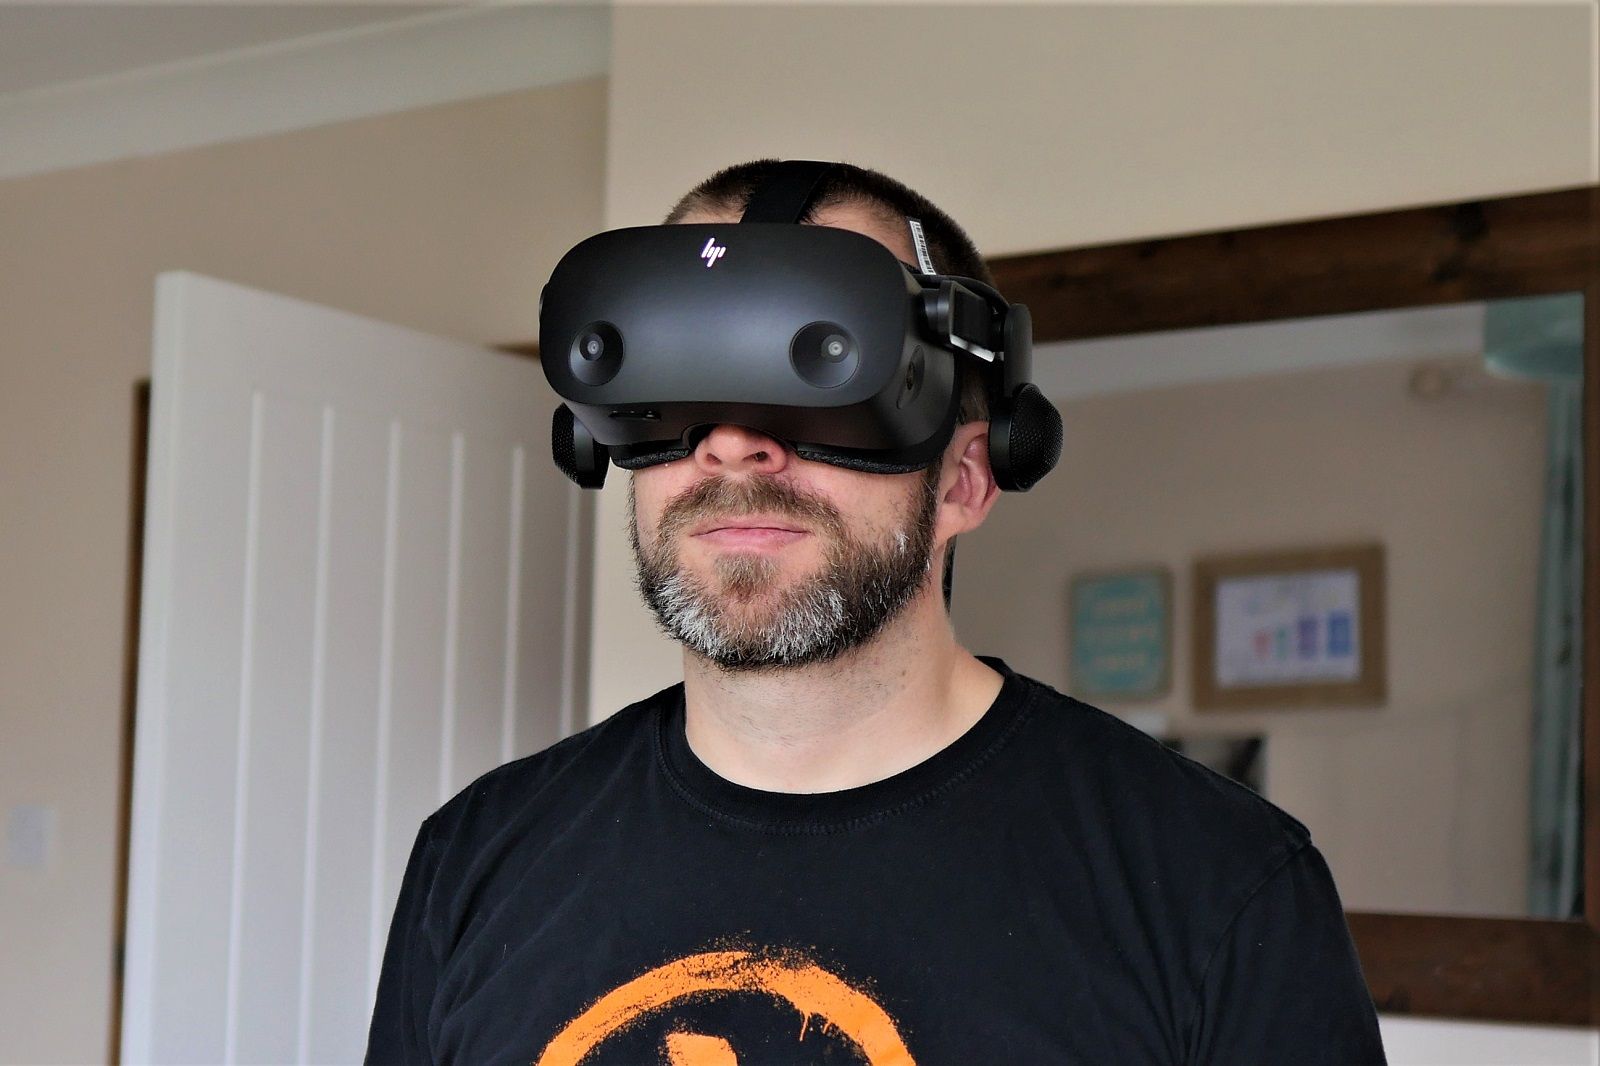 HP Reverb G2 VR headset review on head photo 12